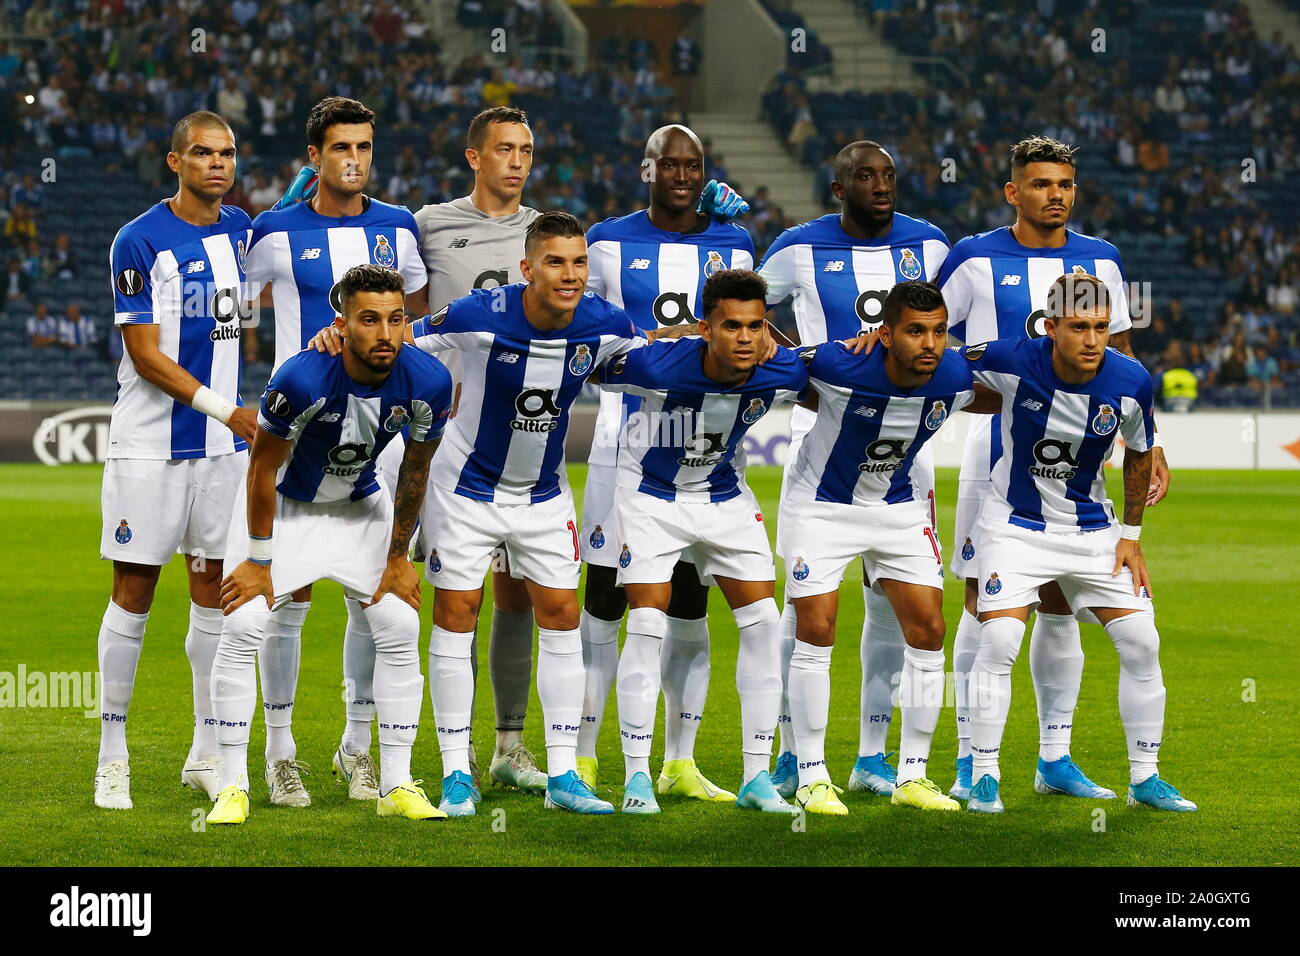 Porto, Portugal. 19th Sep, 2019. FC Porto team group line-up (Porto)  Football/Soccer : UEFA Europa League group stage Mtchday 1 Group G match  between FC Porto 2-1 BSC Young Boys at the